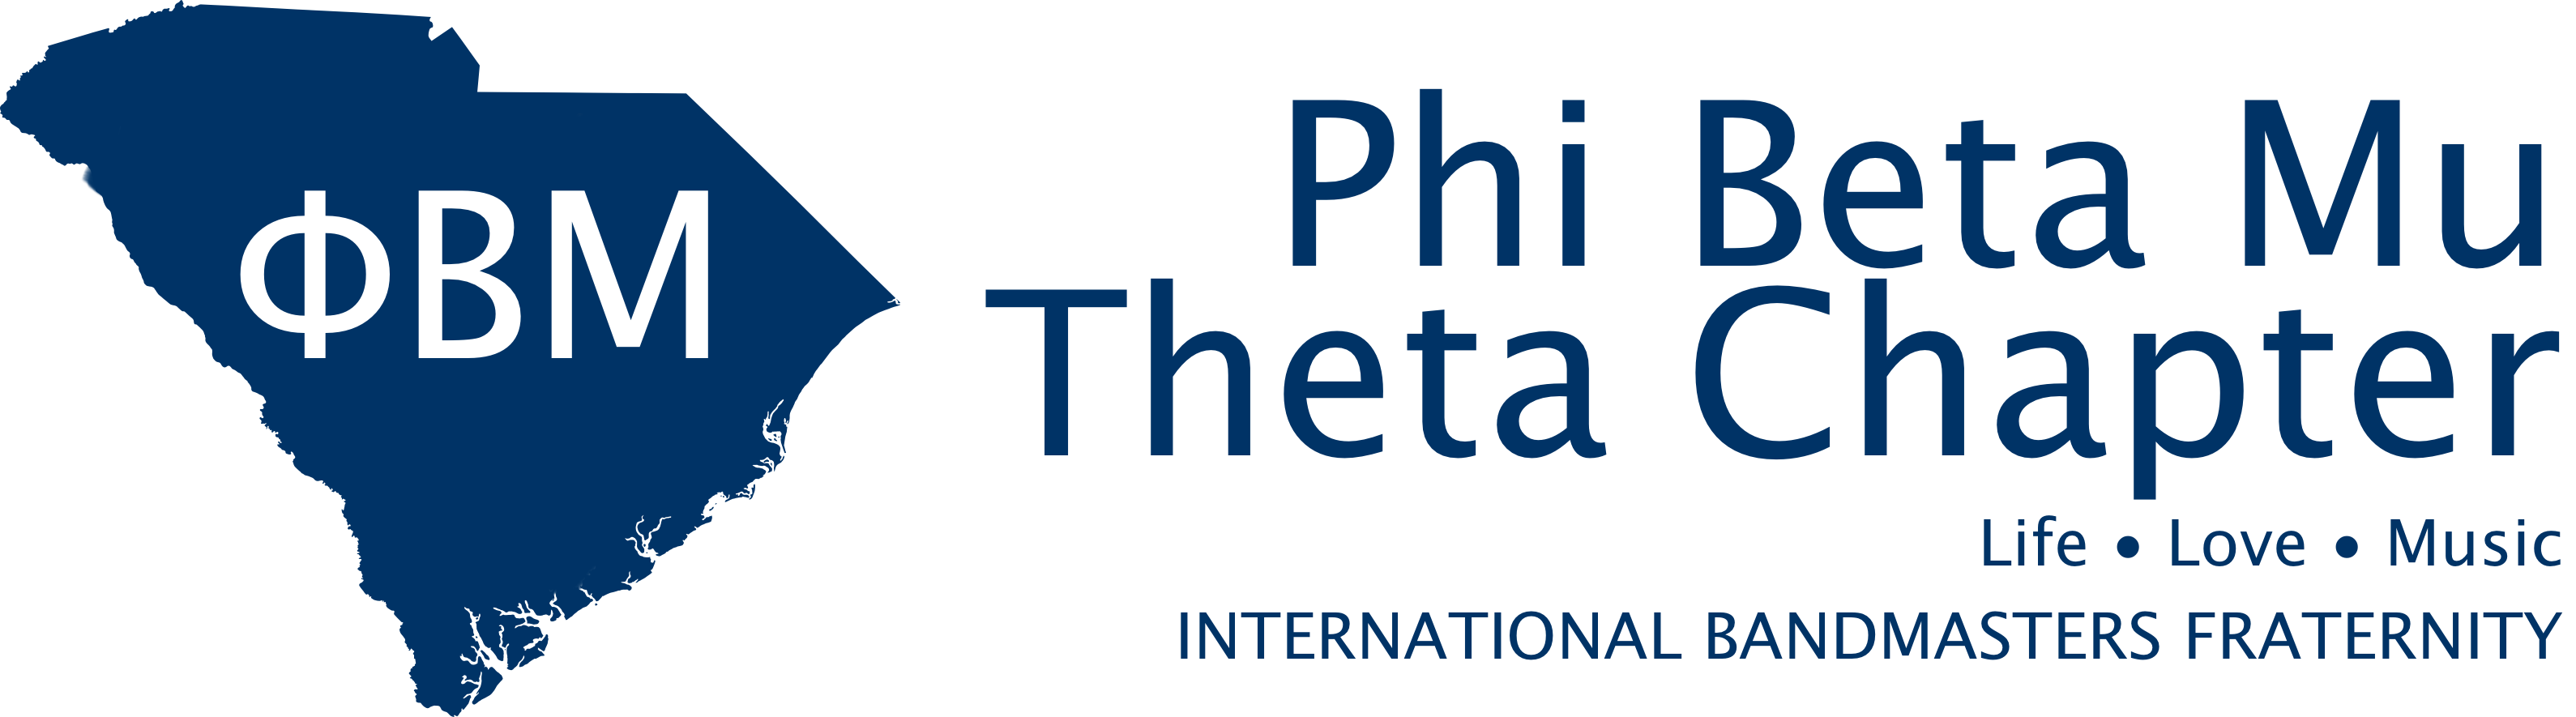 The official website of the SC Chapter of Phi Beta Mu International Bandmasters Fraternity